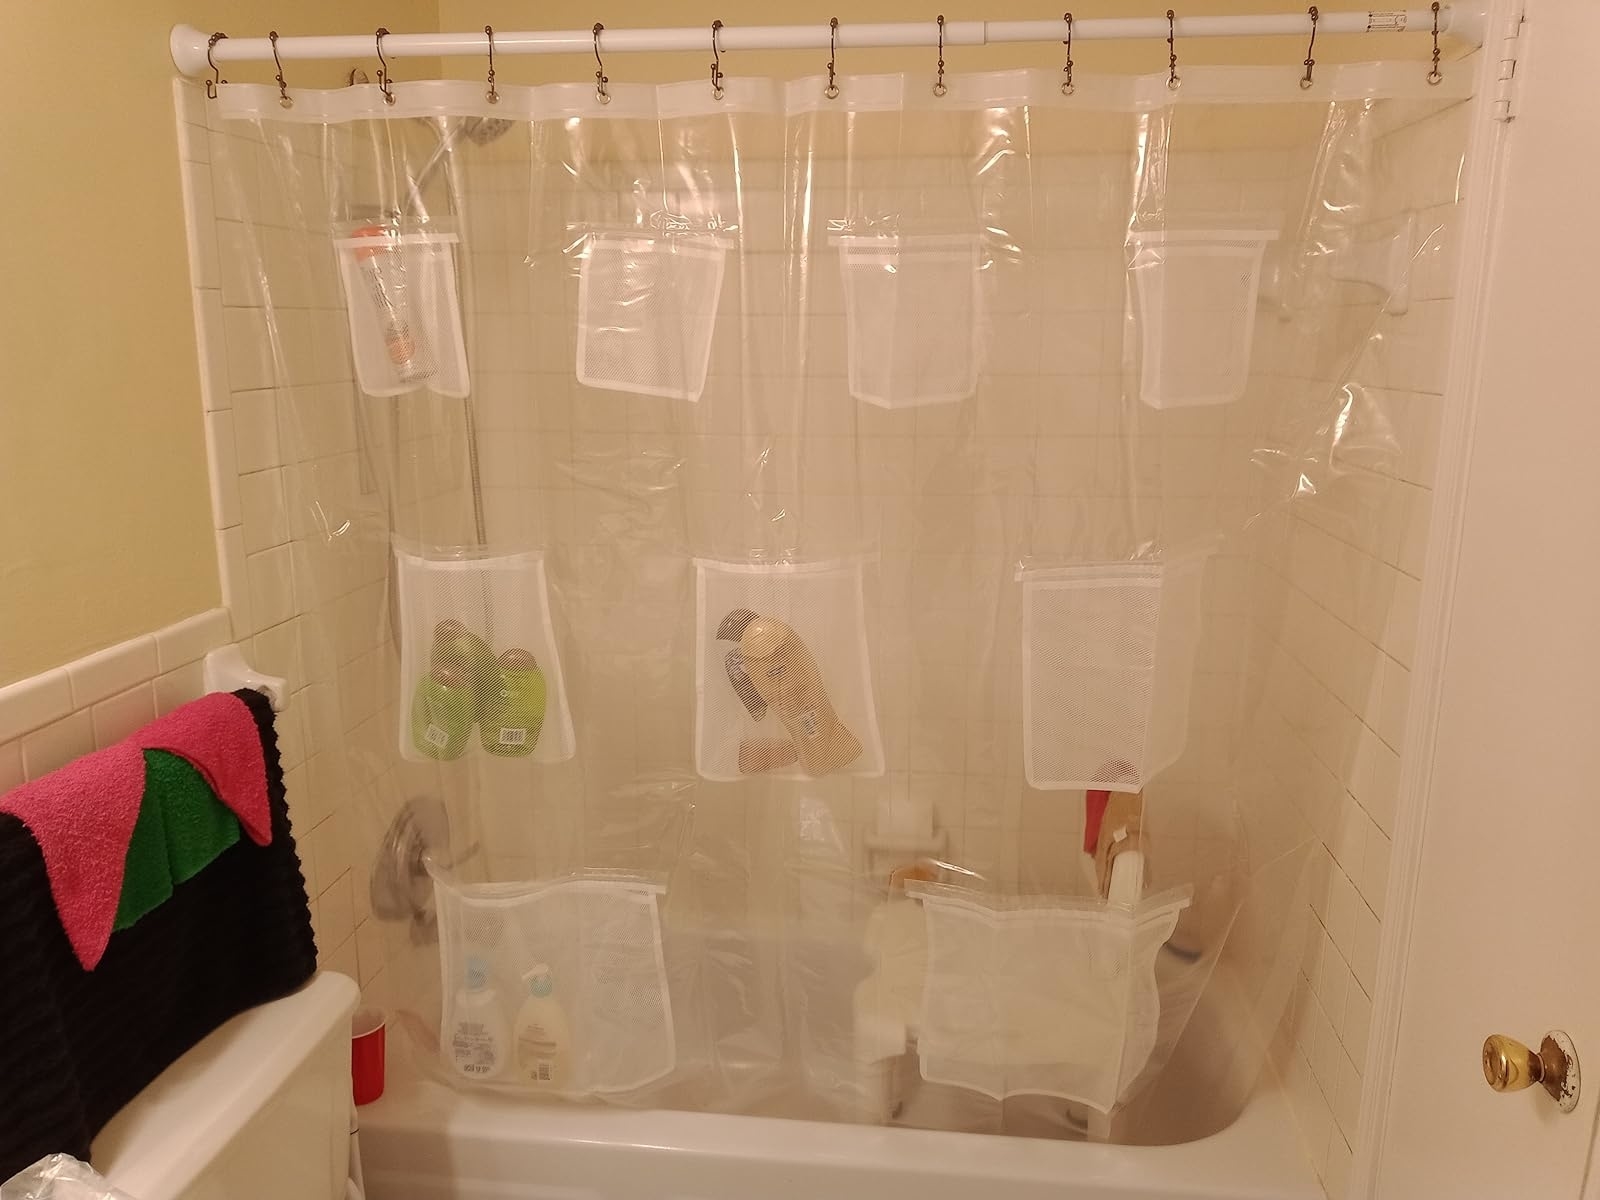 Reviewer image of the clear shower curtain hanging in their bathroom